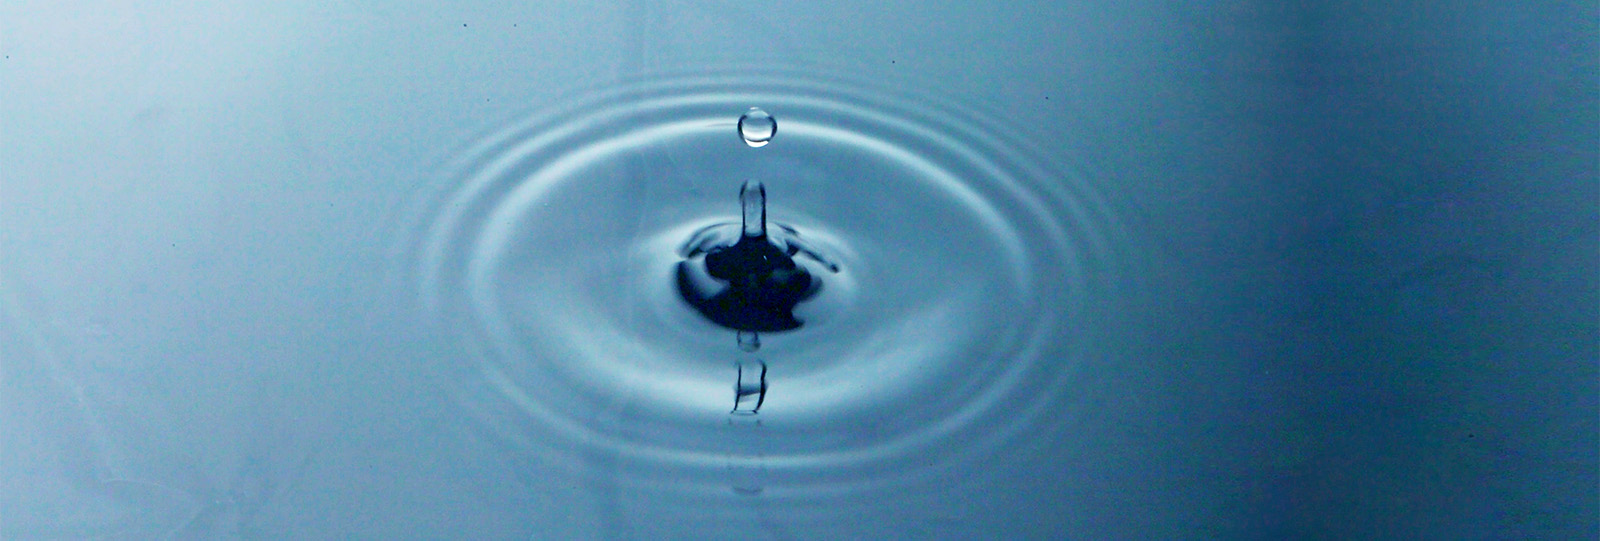 closeup picture of a a drop of water dropping